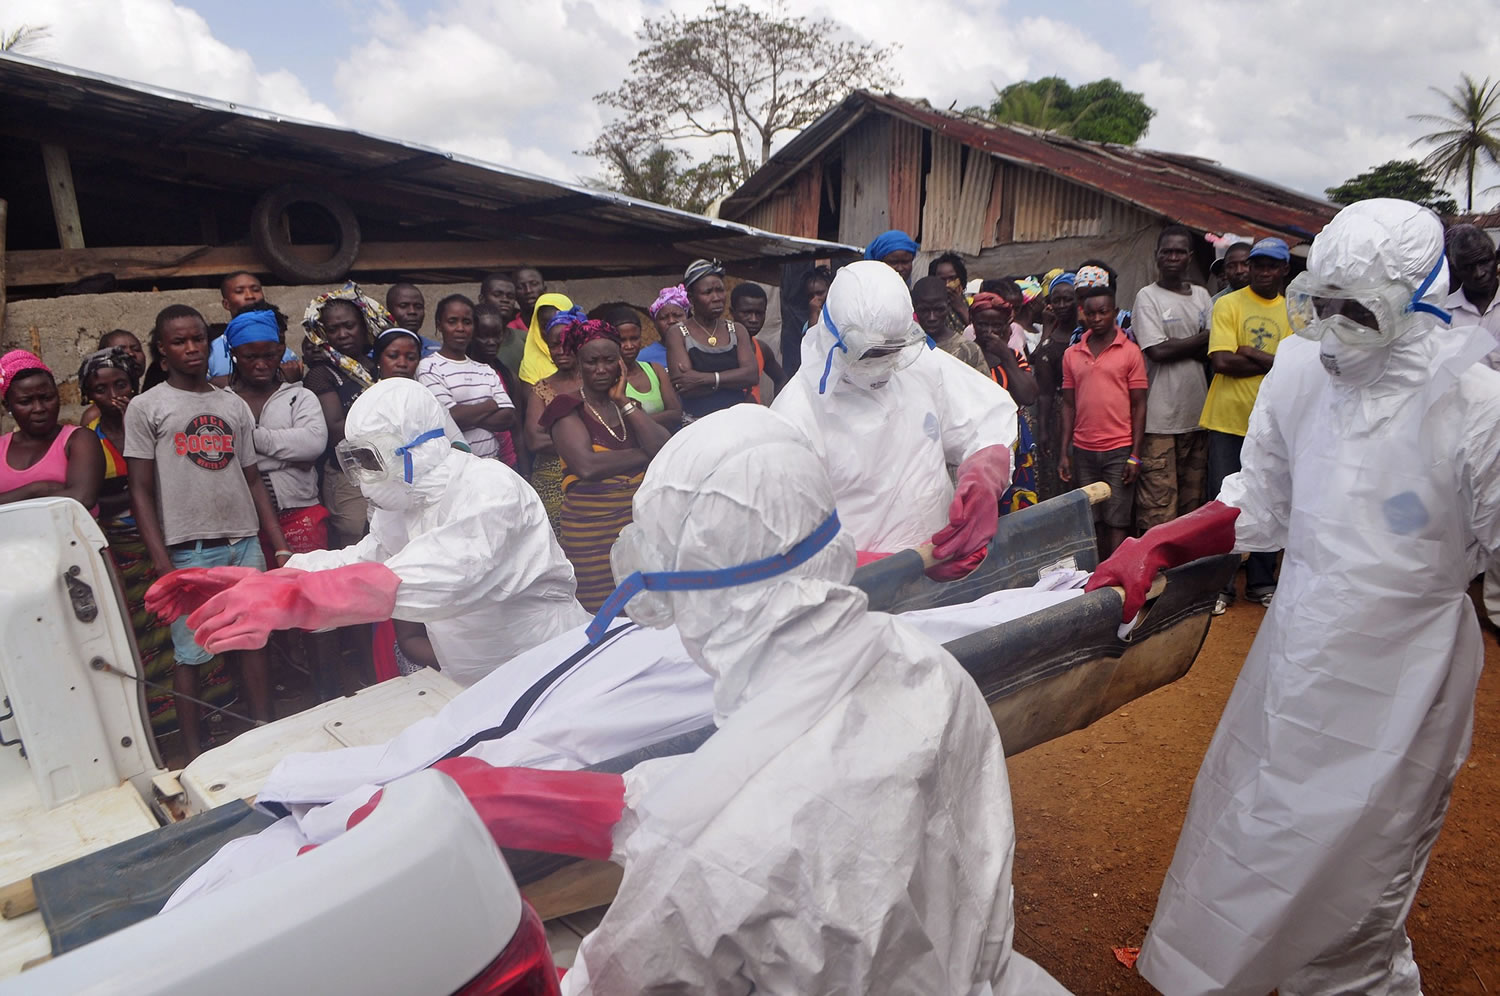 Ebola health care workers on Friday carry the body of a man suspected of dying from the Ebola virus in a small village Gbah on the outskirts of Monrovia, Liberia. A U.N. peacekeeper who contracted Ebola in Liberia will be flown to the Netherlands for treatment, a Dutch Health Ministry spokeswoman said Friday.